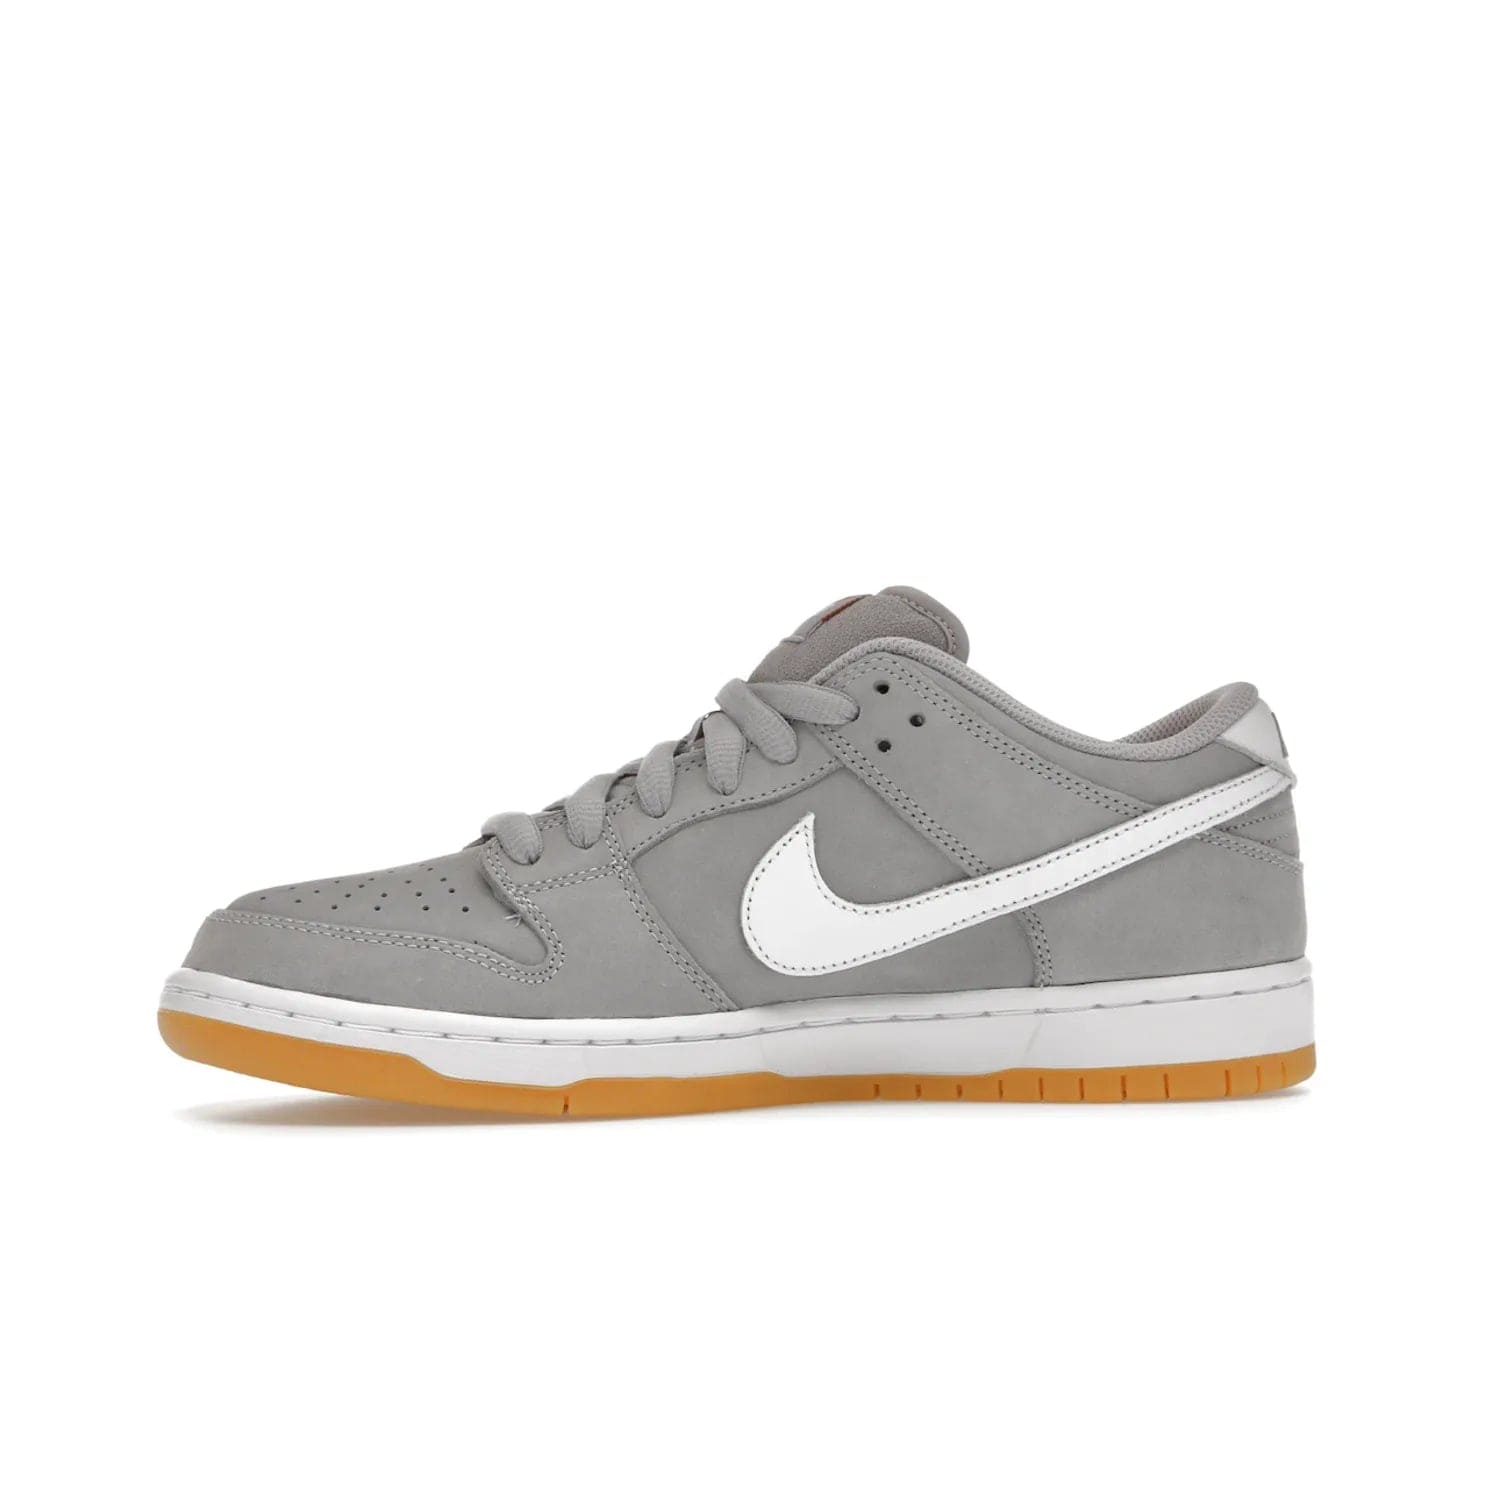 Nike SB Dunk Low Pro ISO Orange Label Wolf Grey Gum - Image 18 - Only at www.BallersClubKickz.com - Introducing Nike's SB Dunk Low Pro ISO Orange Label Wolf Grey Gum - a stylish shoe with a premium Wolf Grey upper, white leather Nike Swoosh, and an eye-catching gum outsole. With special Nike branding and packaging, this shoe adds a unique fashion statement. Out Feb. 24, 2023.